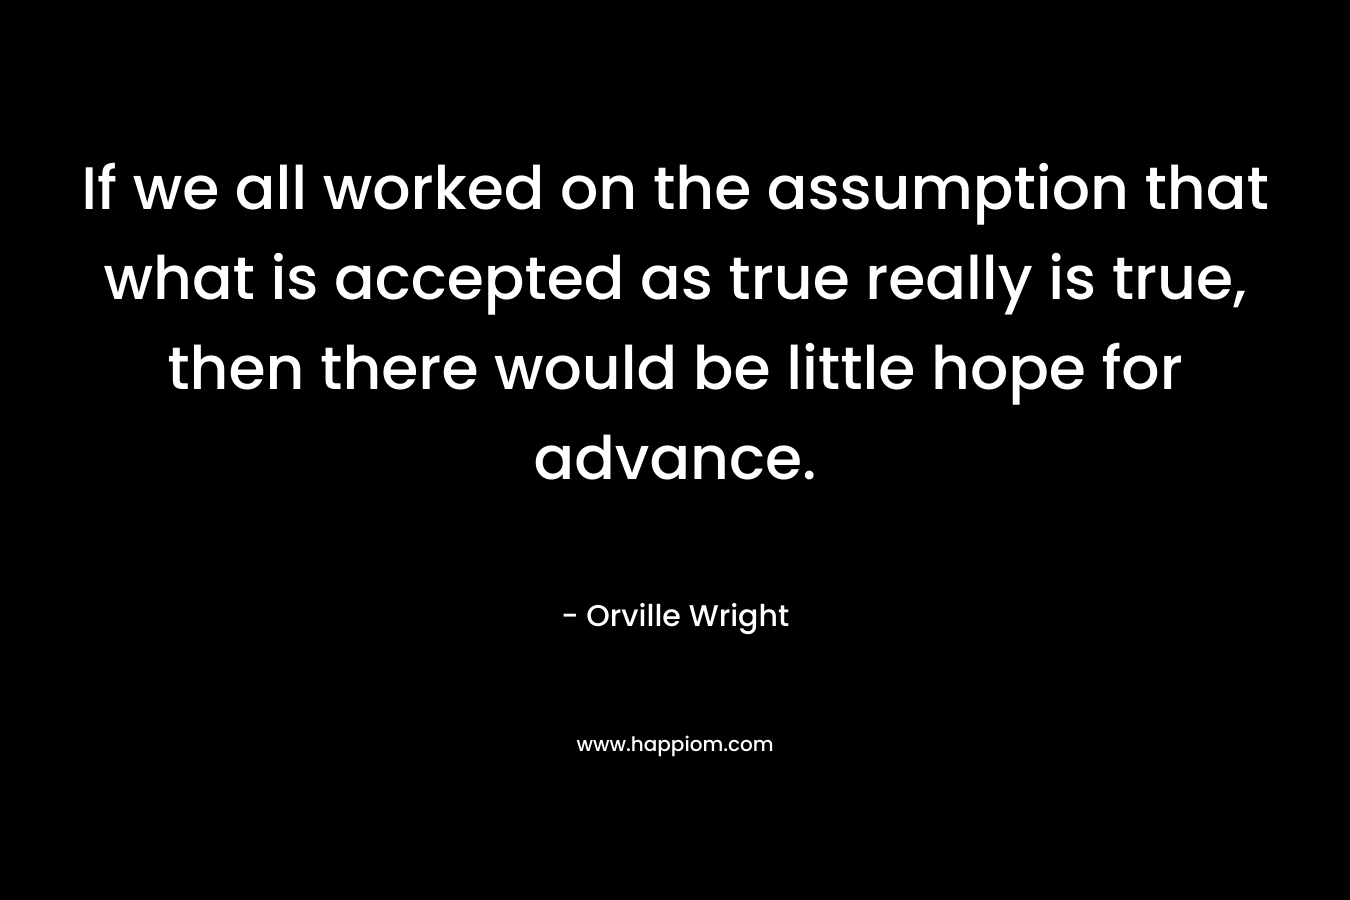 If we all worked on the assumption that what is accepted as true really is true, then there would be little hope for advance.